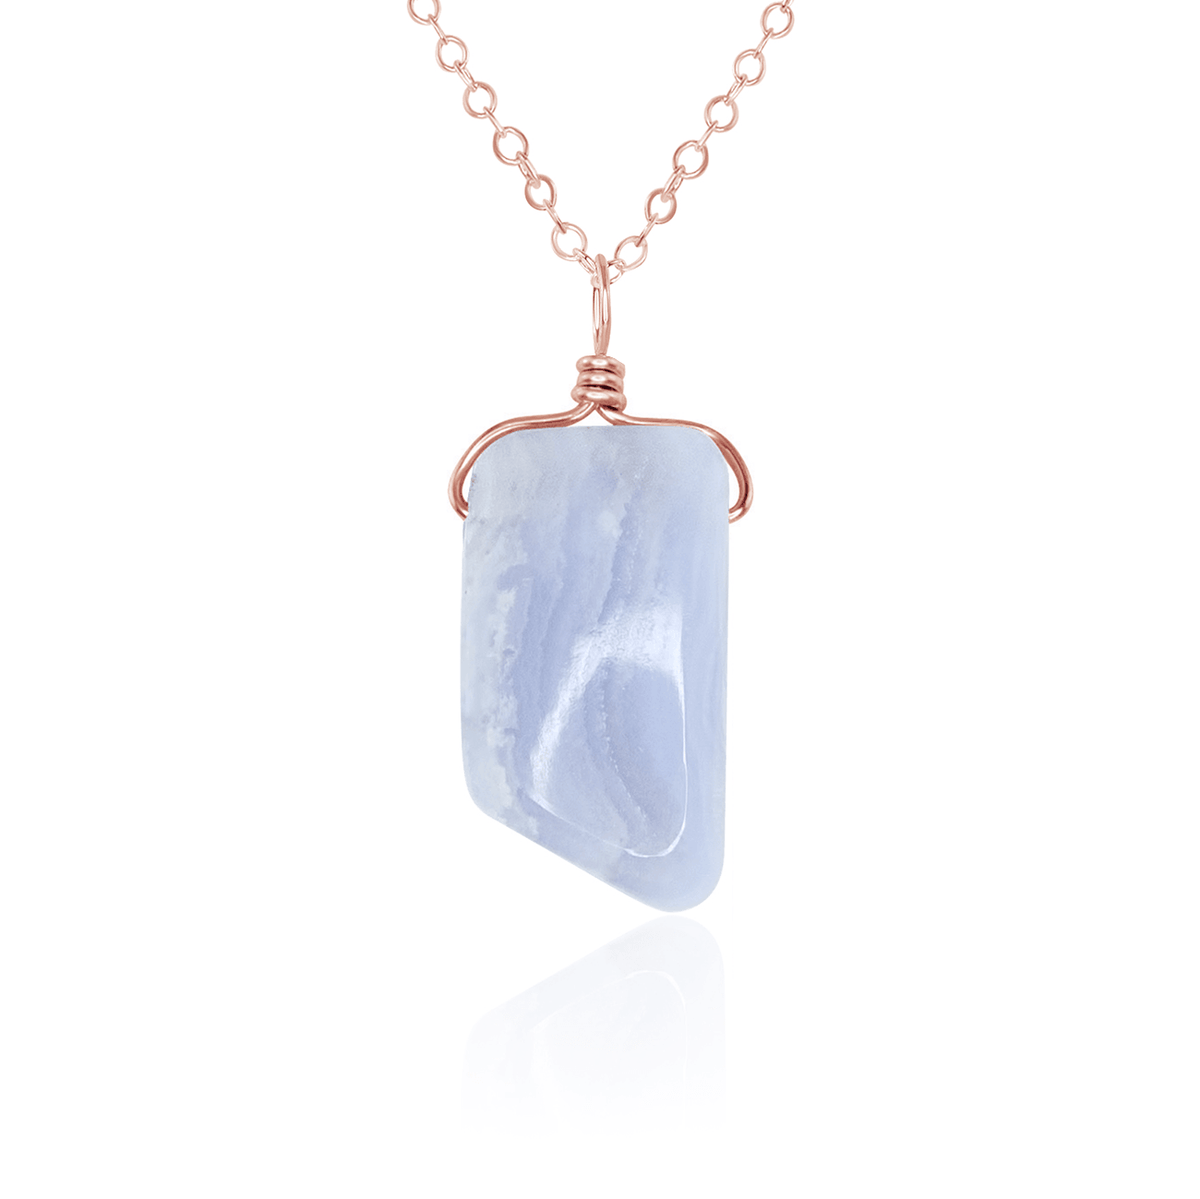 Small Smooth Blue Lace Agate Gentle Point Crystal Pendant Necklace - Small Smooth Blue Lace Agate Gentle Point Crystal Pendant Necklace - 14k Rose Gold Fill / Cable - Luna Tide Handmade Crystal Jewellery